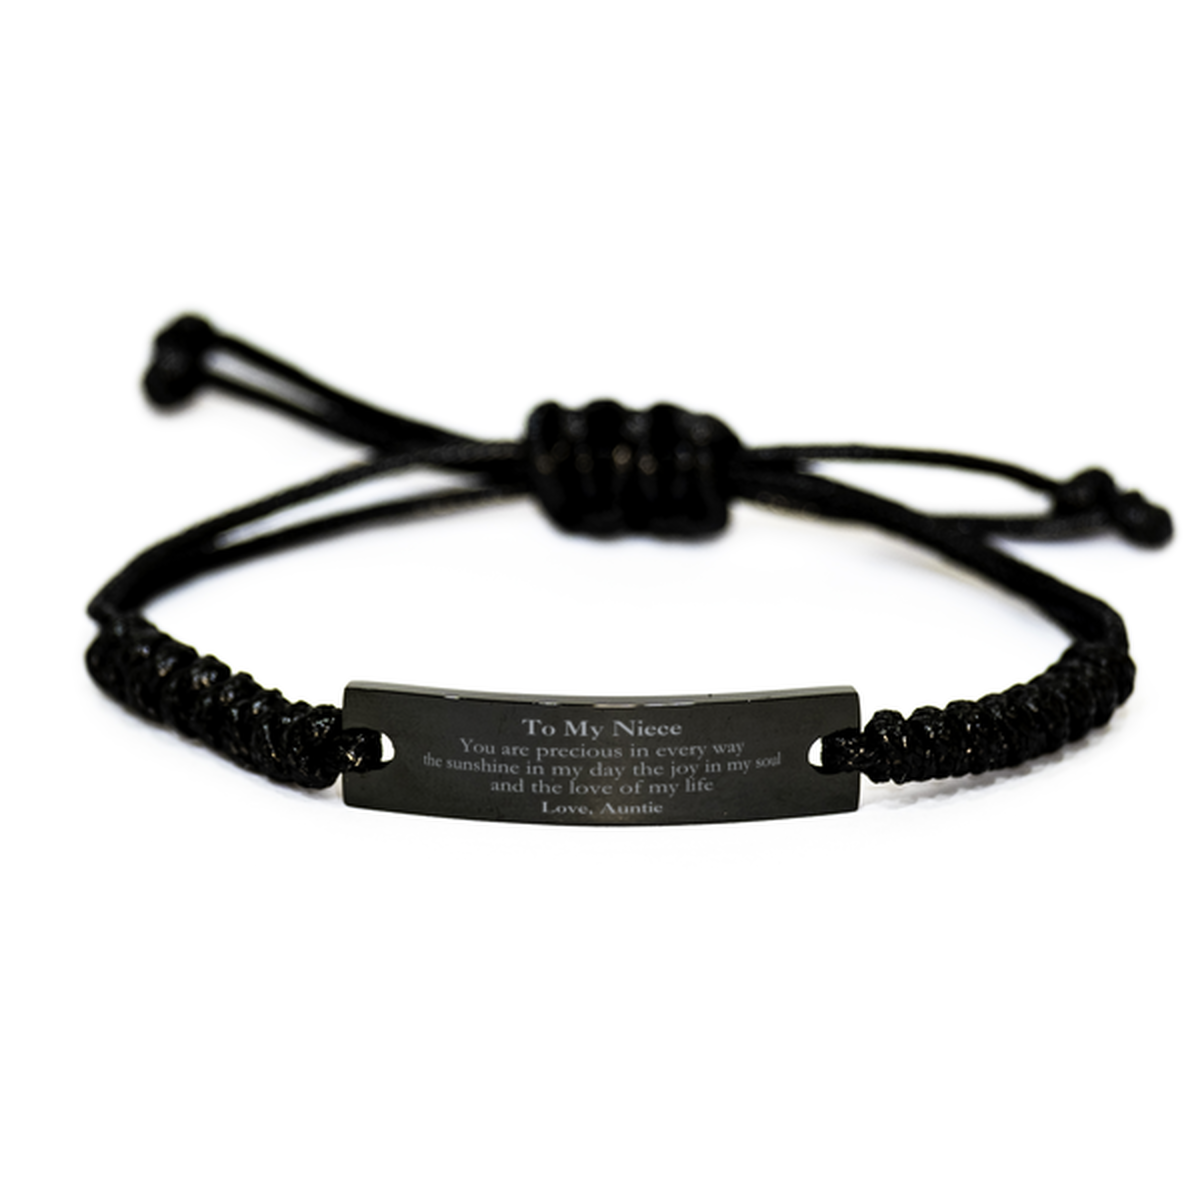 Graduation Gifts for Niece Black Rope Bracelet Present from Auntie, Christmas Niece Birthday Gifts Niece You are precious in every way the sunshine in my day. Love, Auntie